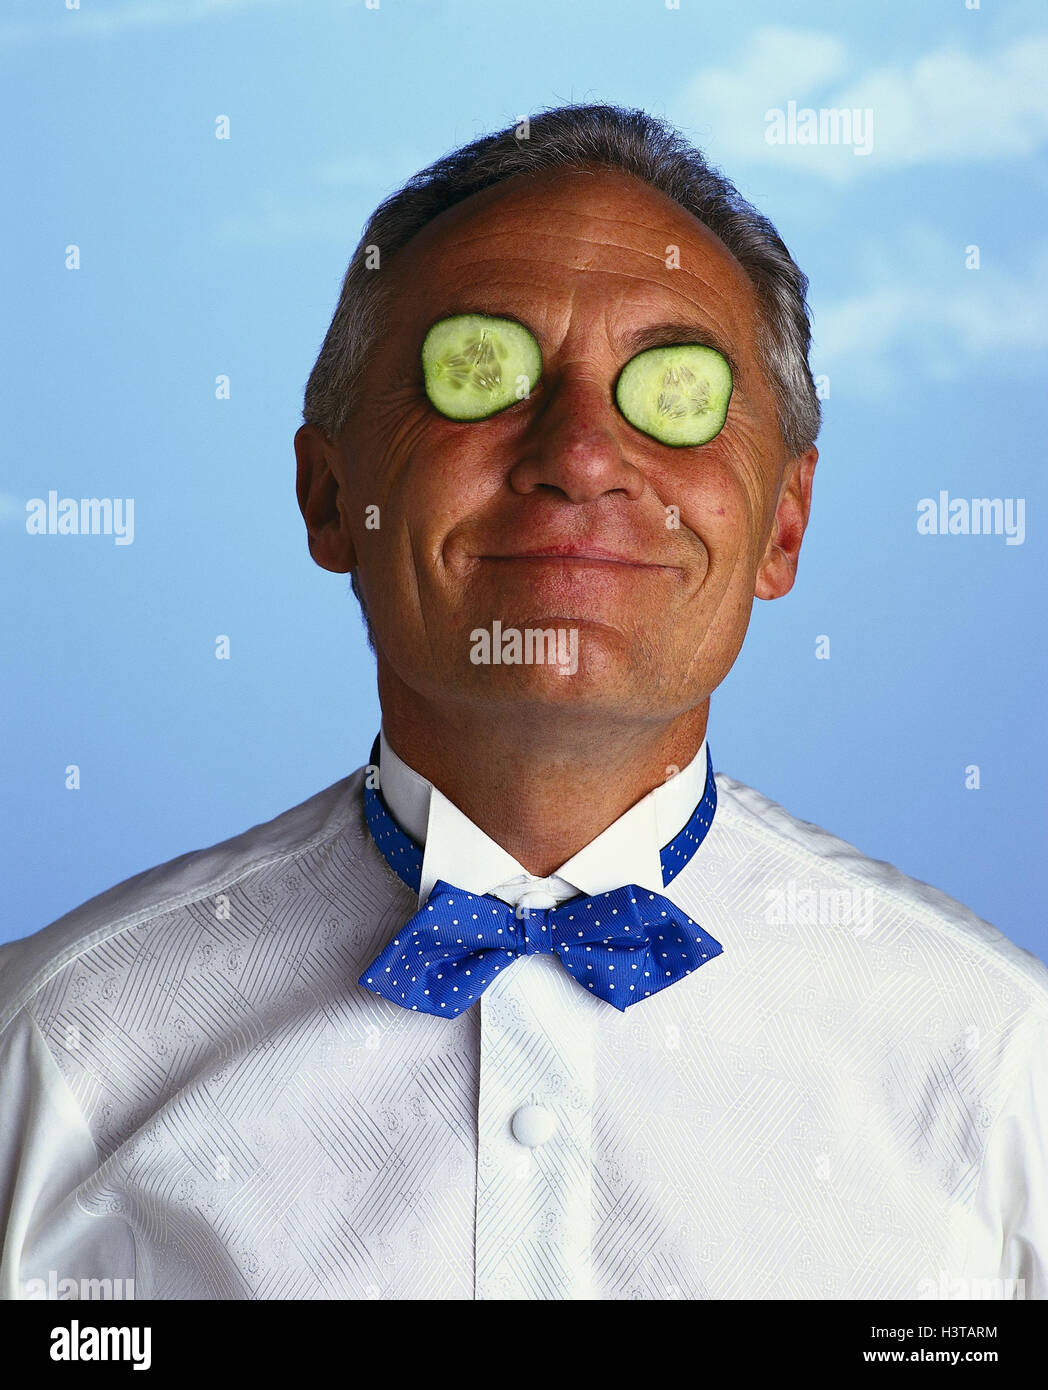 Man, eyes, cucumber slices, smile, portrait, grin inside, middle old person, cucumber, cucumber slice, happy, studio, cut out, stupidly, nonsense, humor, gag, cheerfulness, joke, funnily, joke, fun, amusement Stock Photo